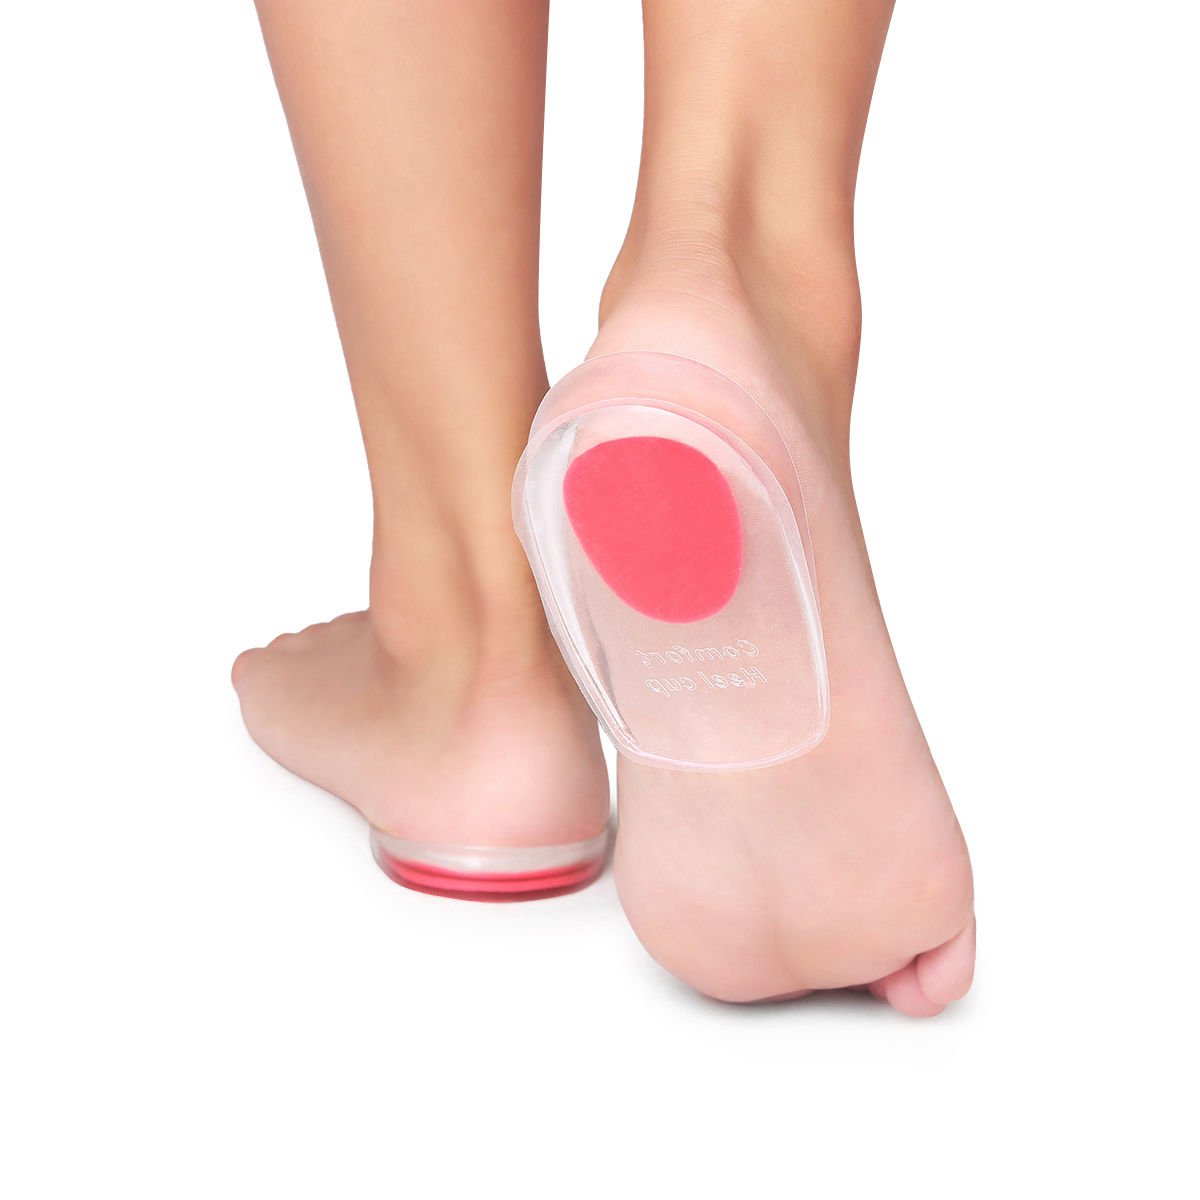 Silicone Gel Heel Comfort Cup Pad Ankle Heel Pain Relief Cushion Insoles Inserts Sole Shoes